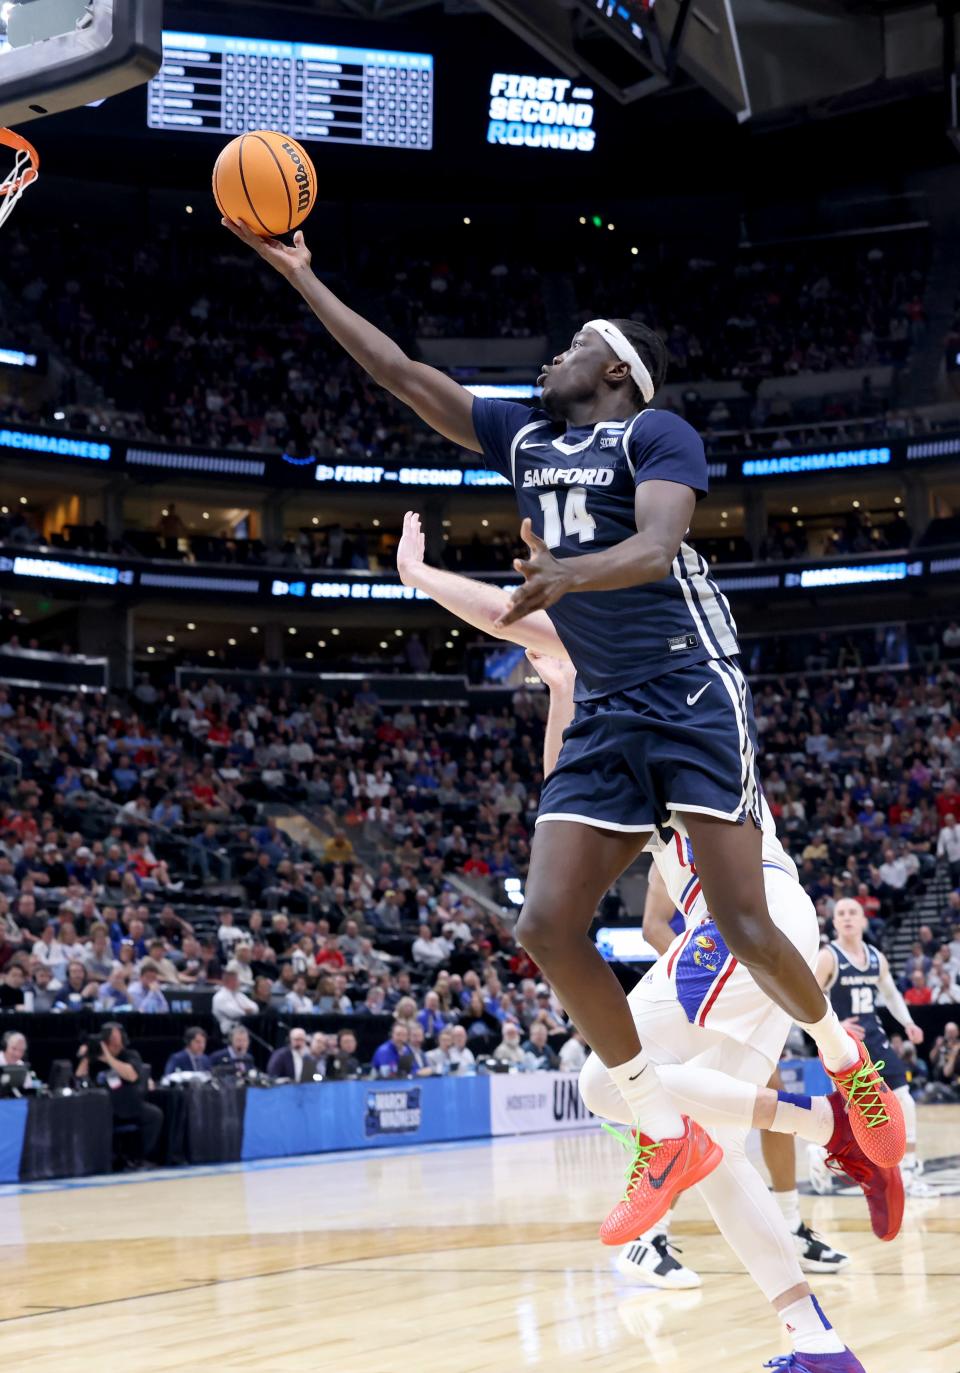 Mar 21, 2024; Salt Lake City, UT, USA; Samford Bulldogs forward Achor Achor (14) shoots during the second half in the first round of the 2024 NCAA Tournament against the Kansas Jayhawks at Vivint Smart Home Arena-Delta Center. Mandatory Credit: Rob Gray-USA TODAY Sports